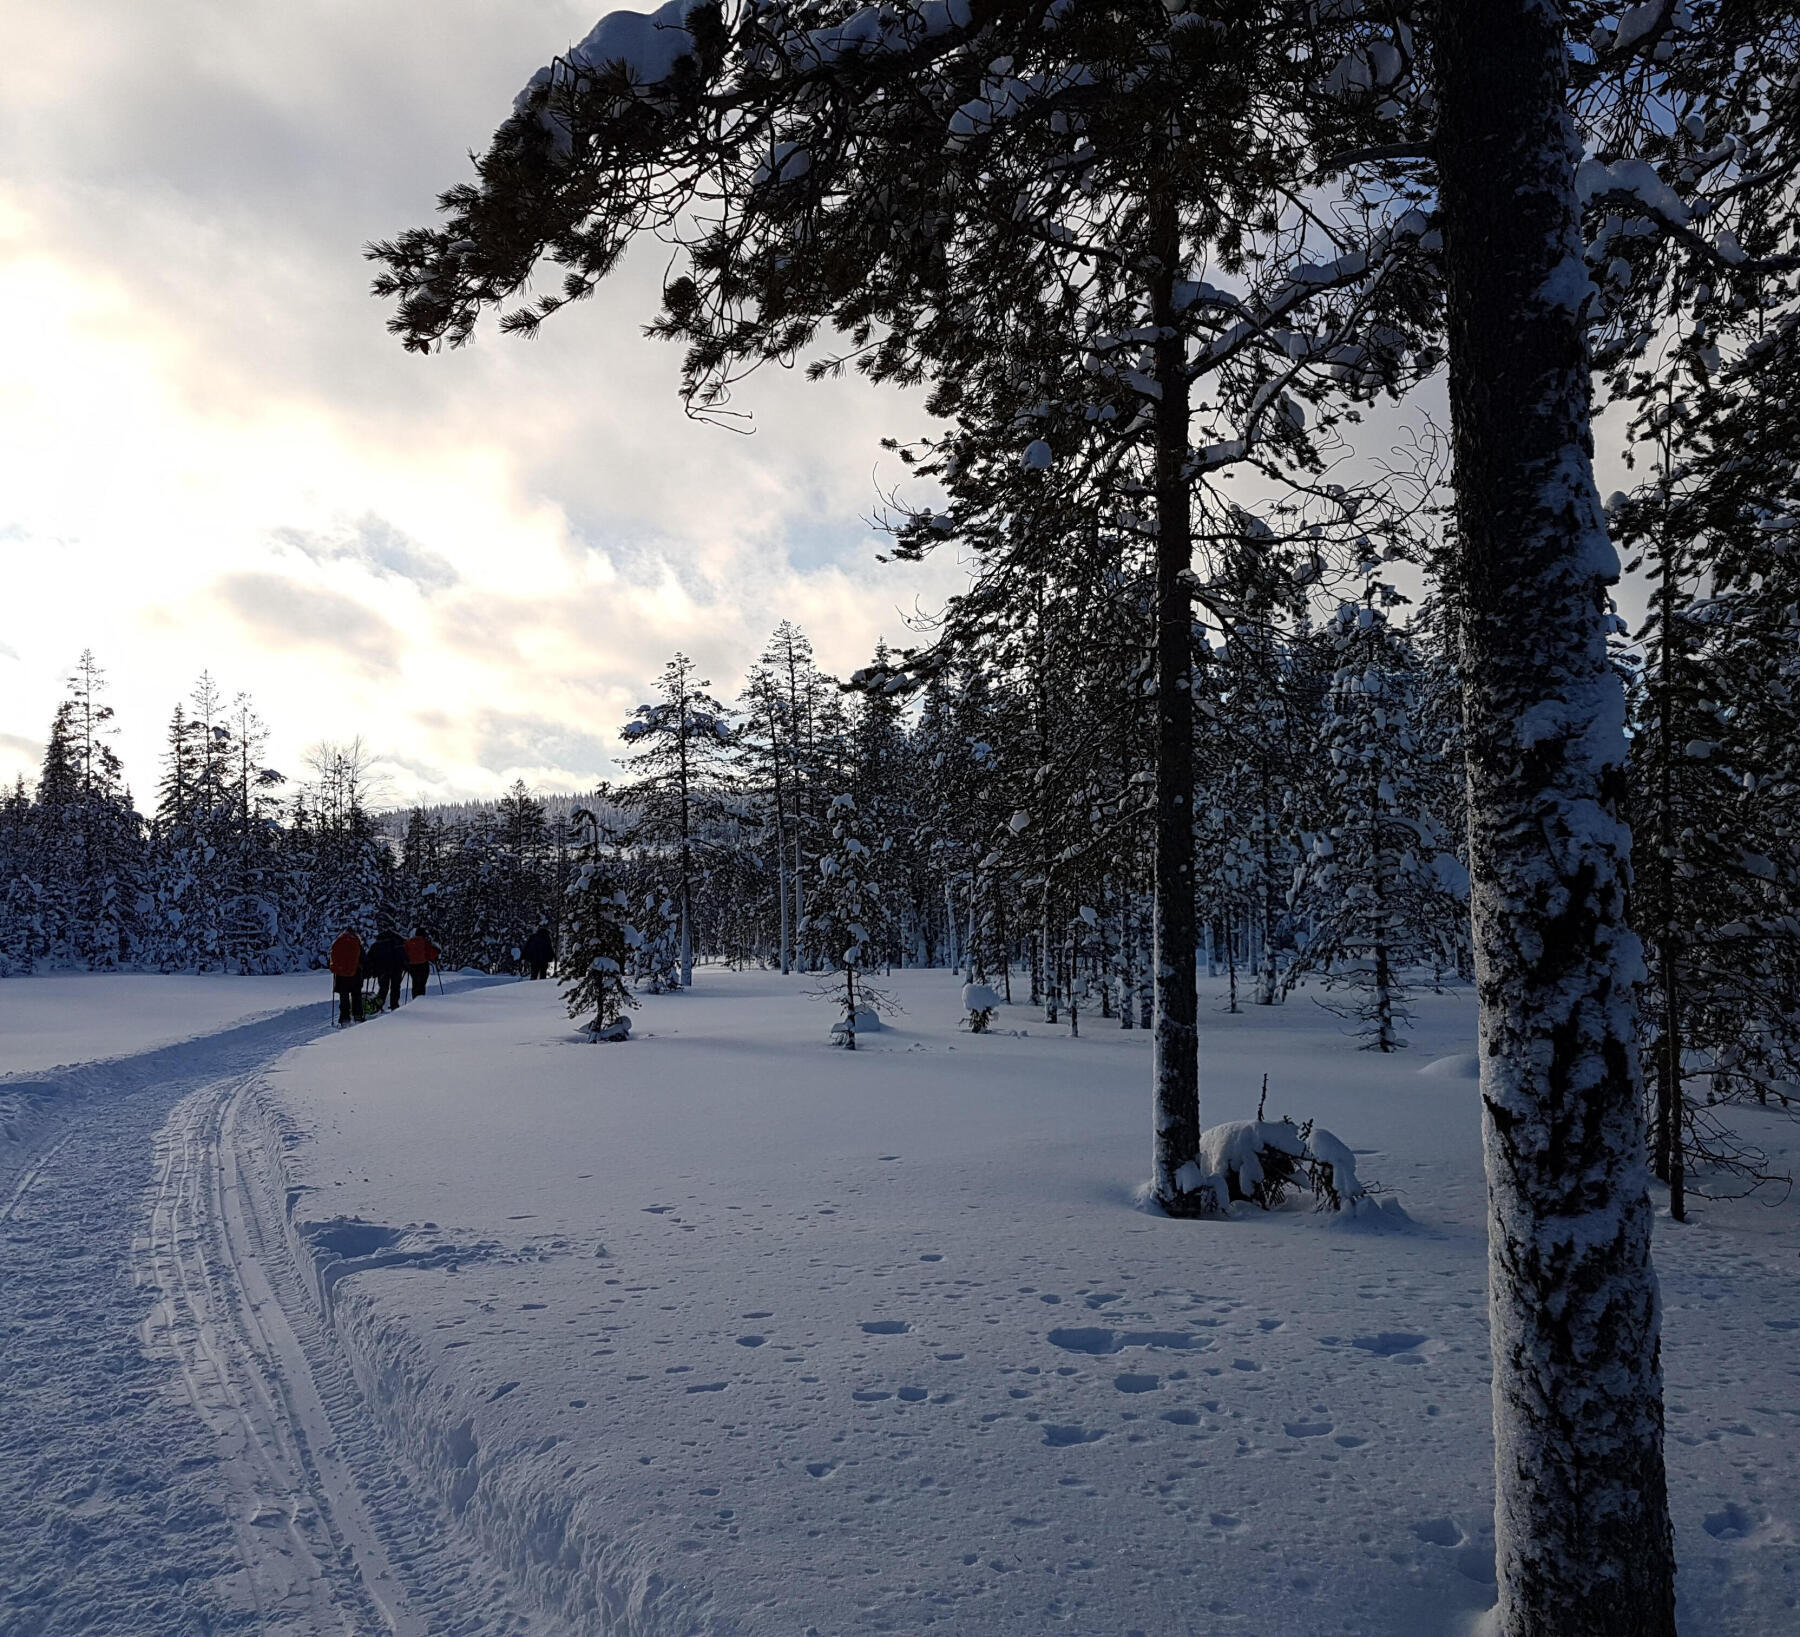 cross-country skiing as a family